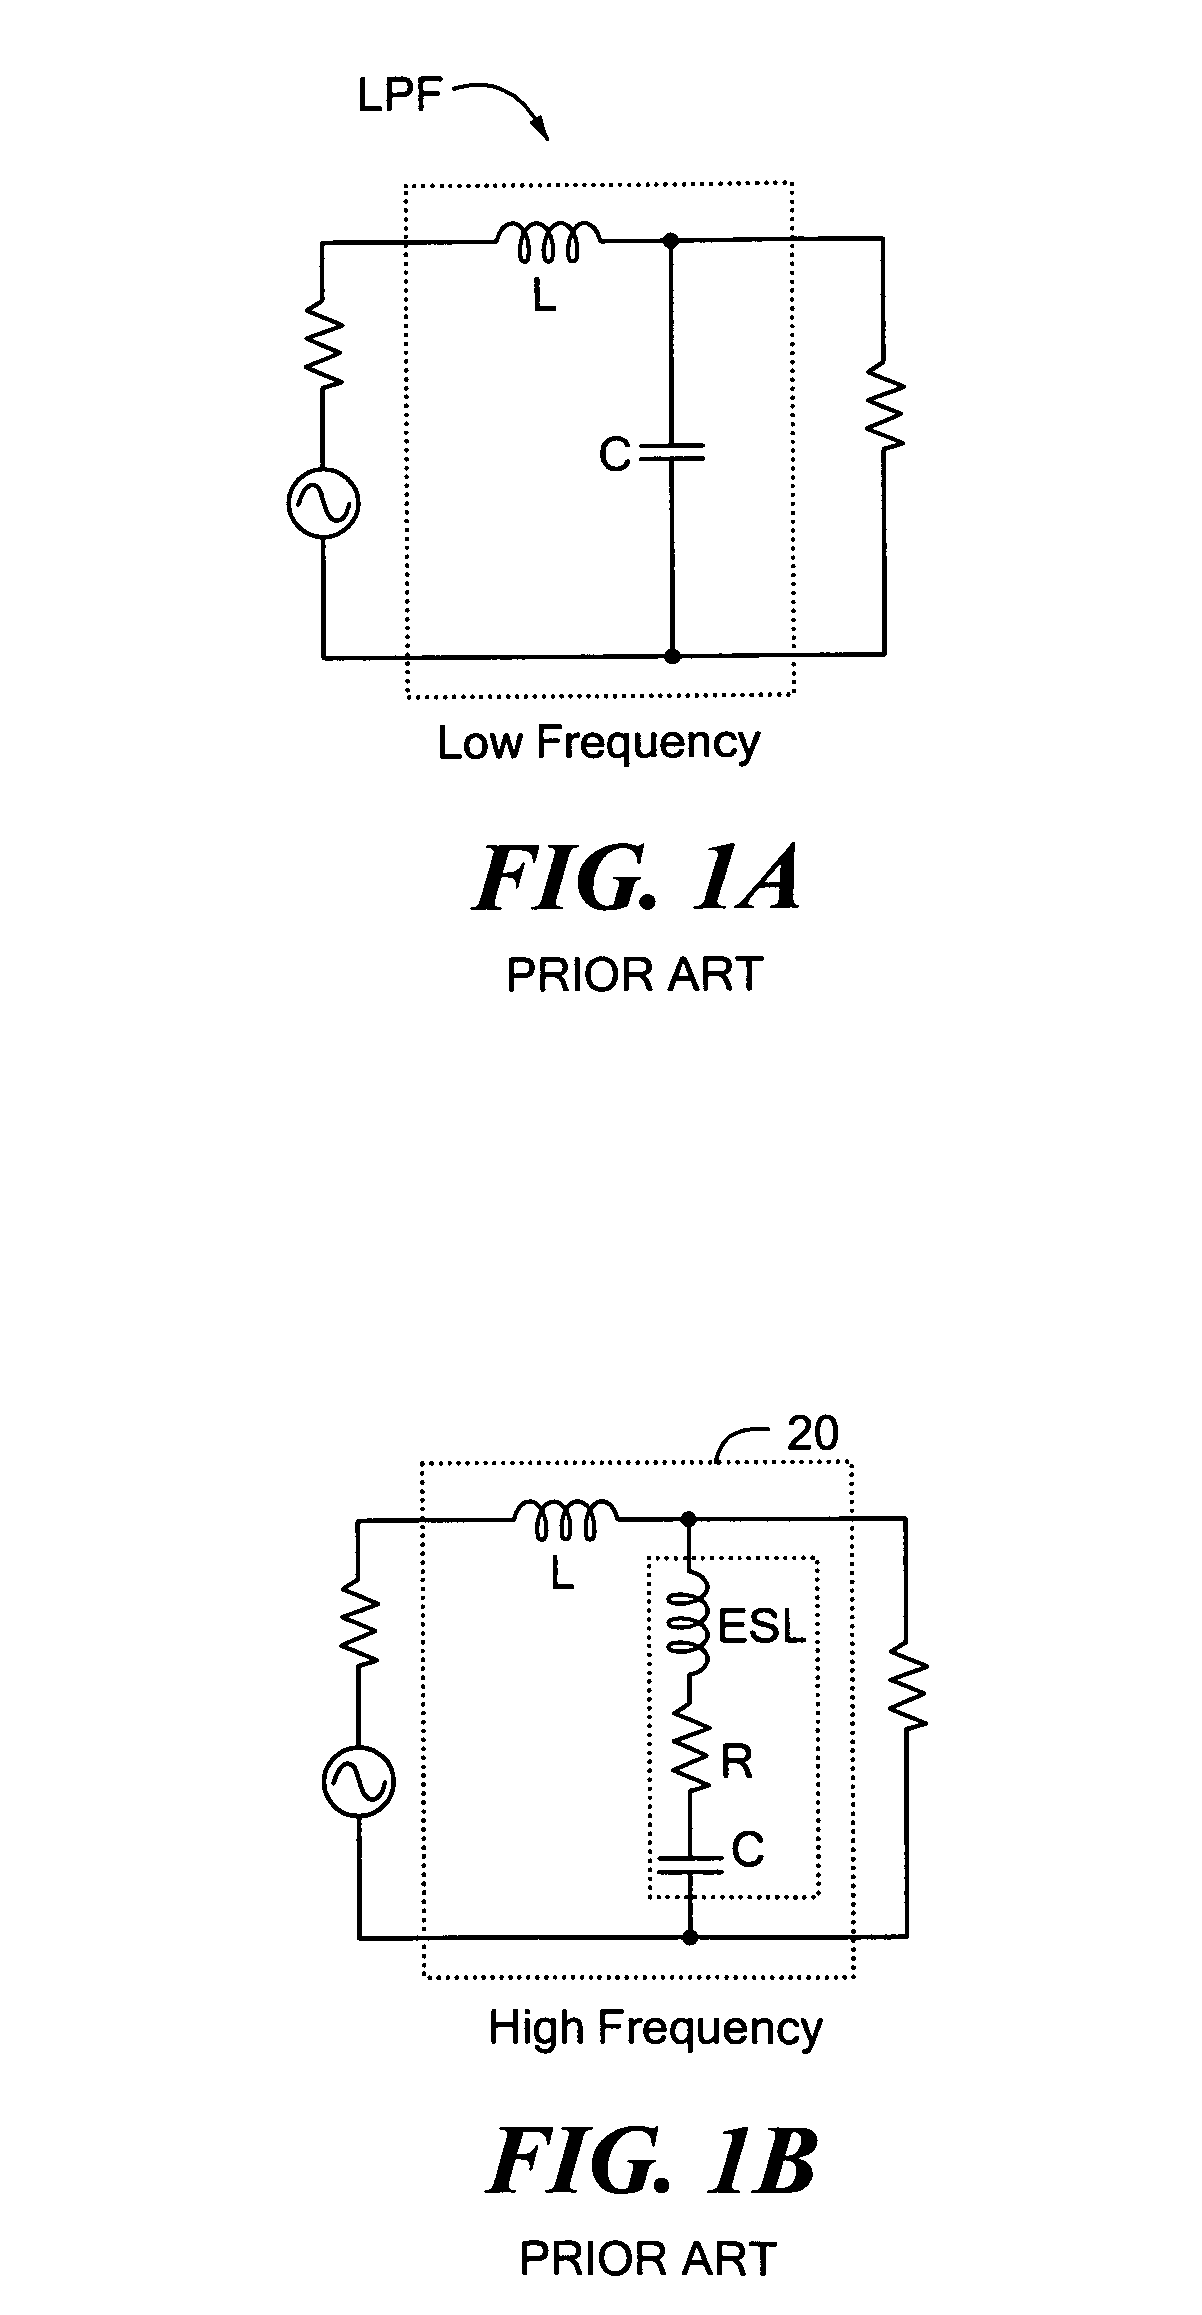 Method and apparatus to provide compensation for parasitic inductance of multiple capacitors